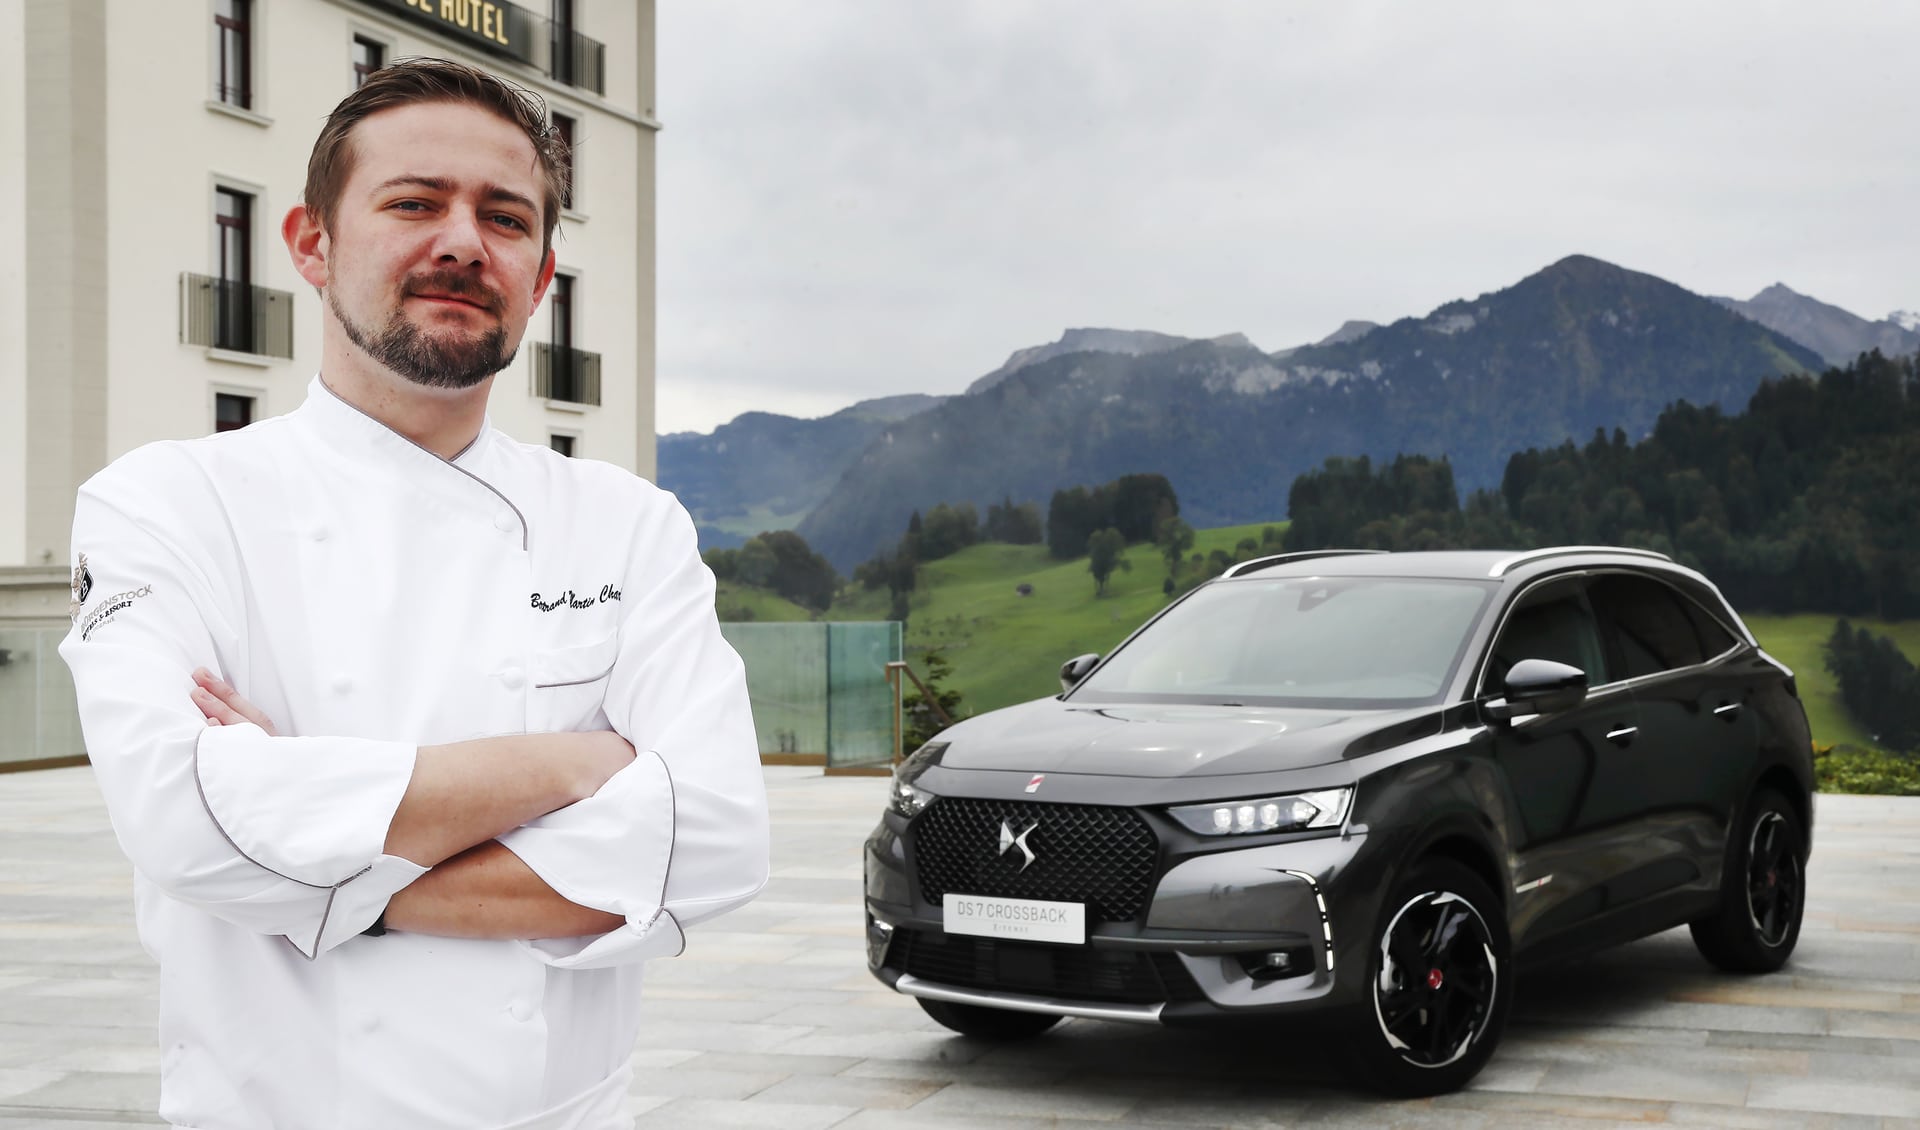 Bertrand Charles cooks at the "RitzCoffier" of the Bürgenstock Resort Lucerne. He is one of the great talents in the country.